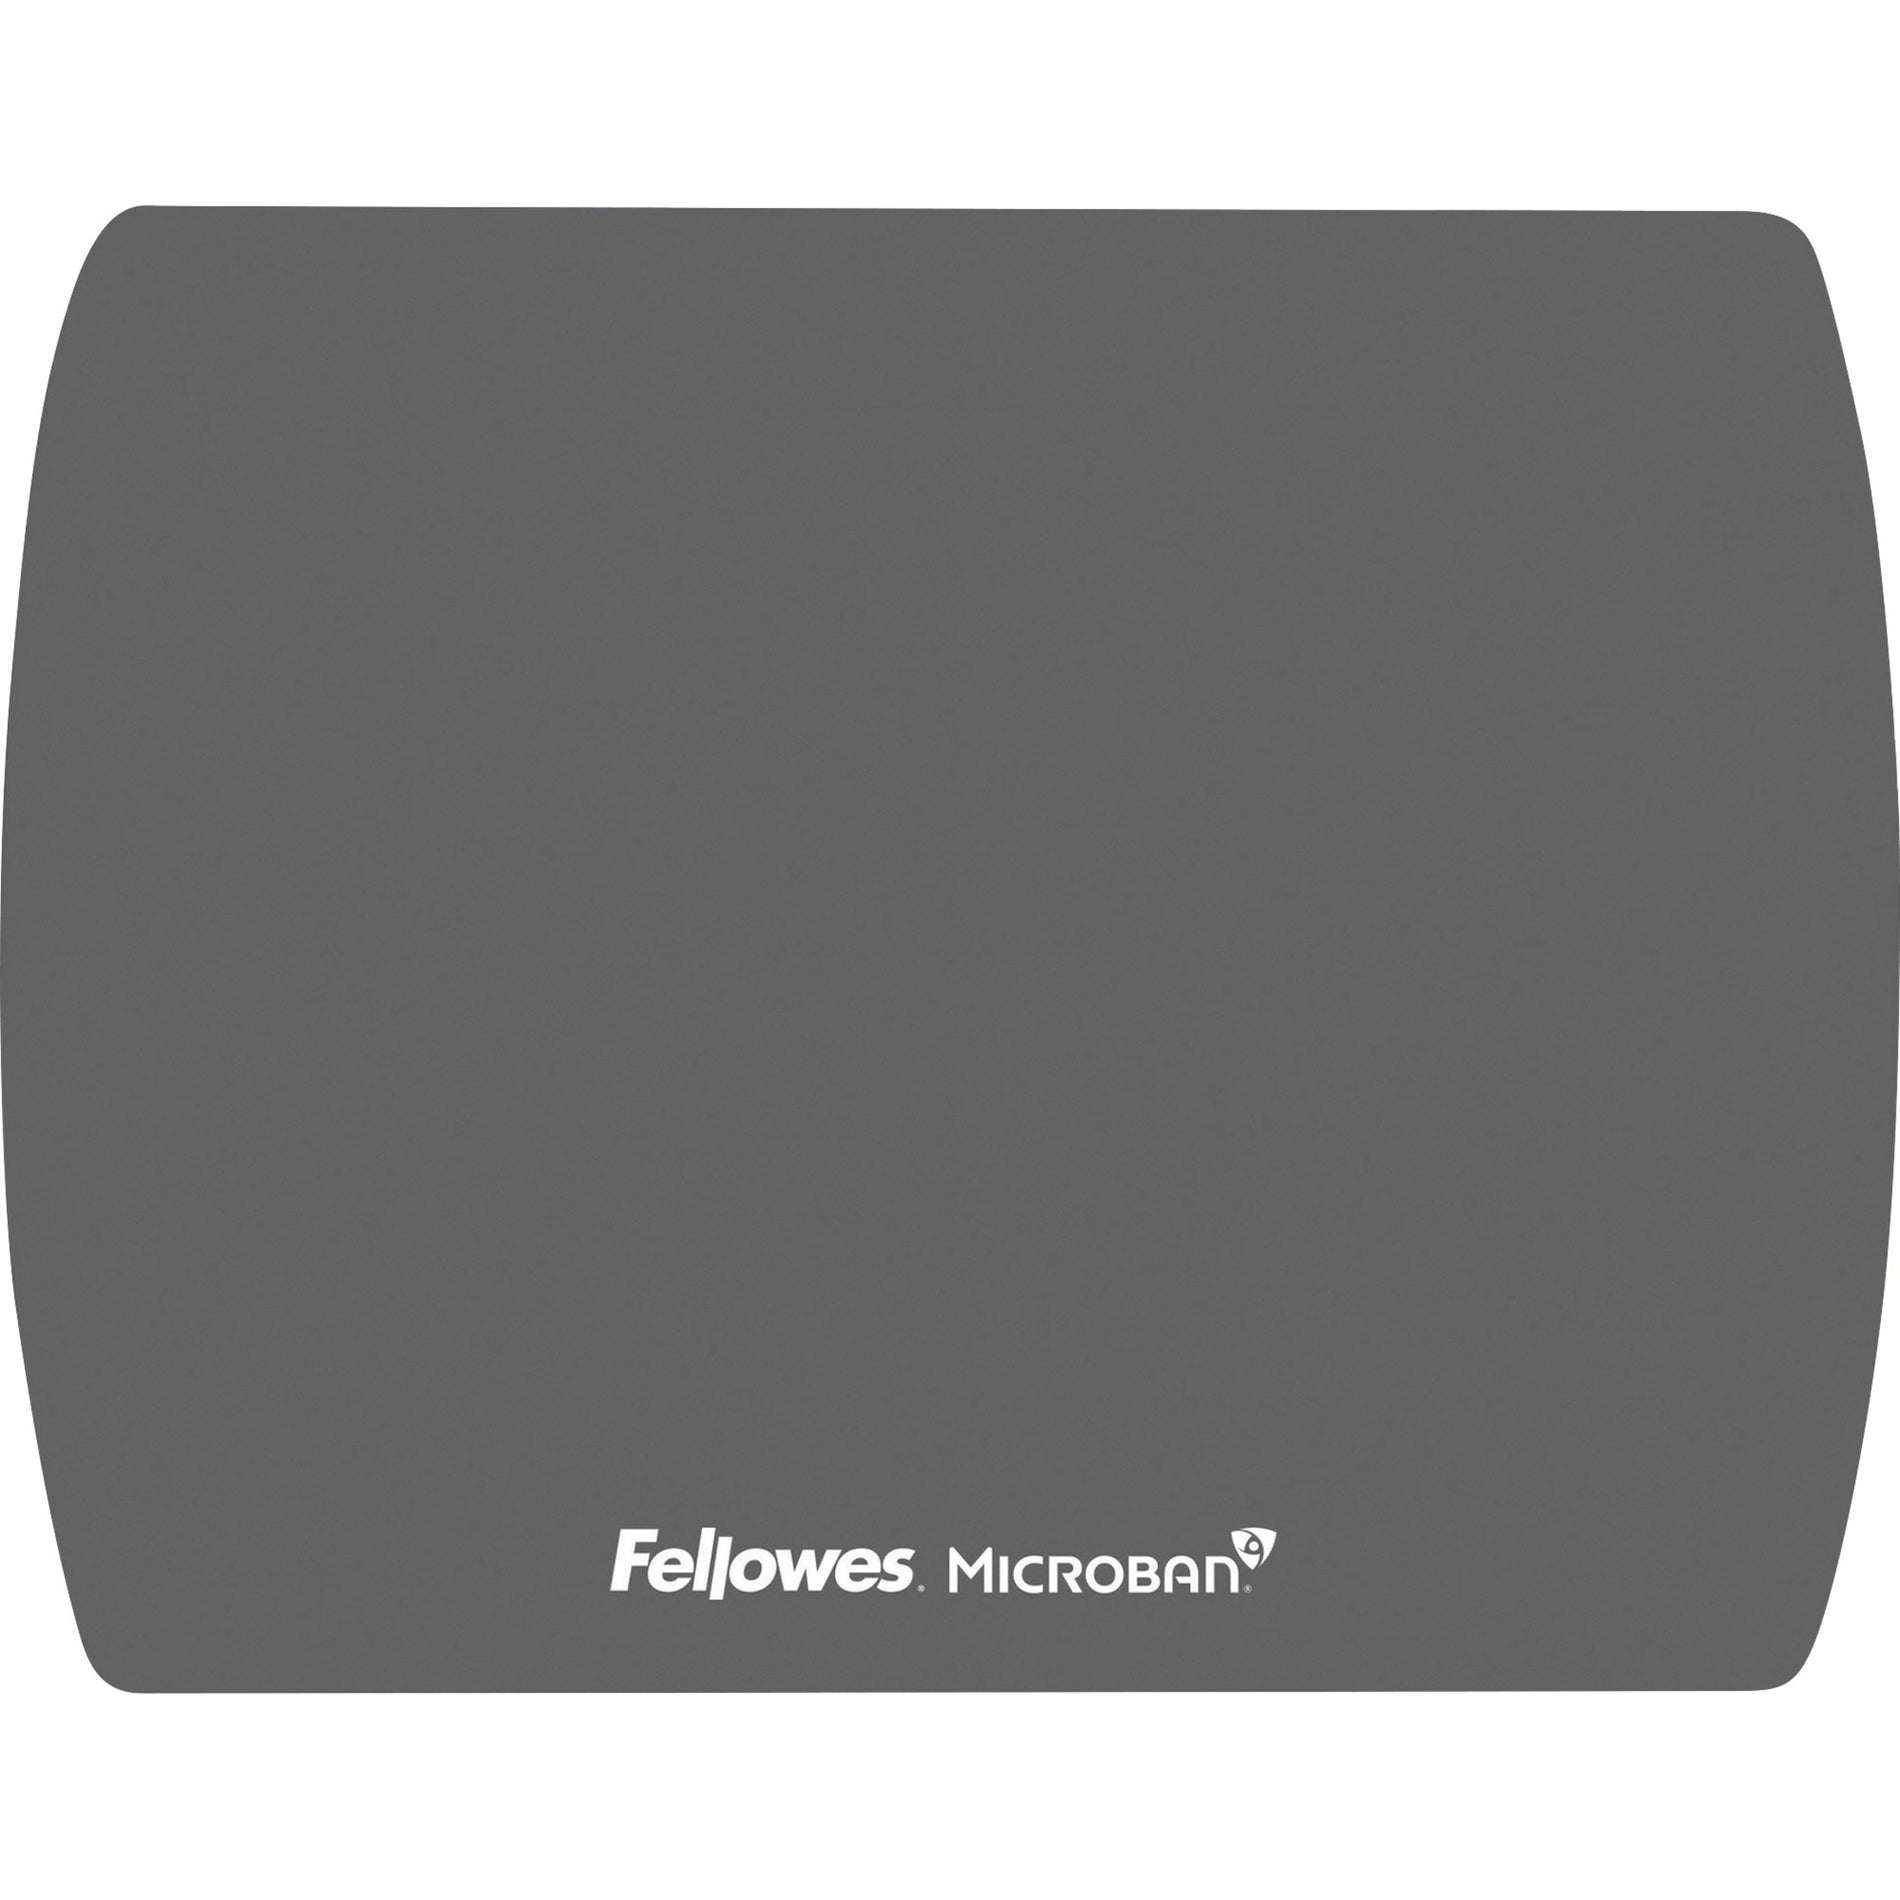 Fellowes 5908201 Microban Ultra-Thin Mouse Pad, Graphite, Antimicrobial, Microban Protection, Recyclable, Ultrathin, Easy to Clean, Durable